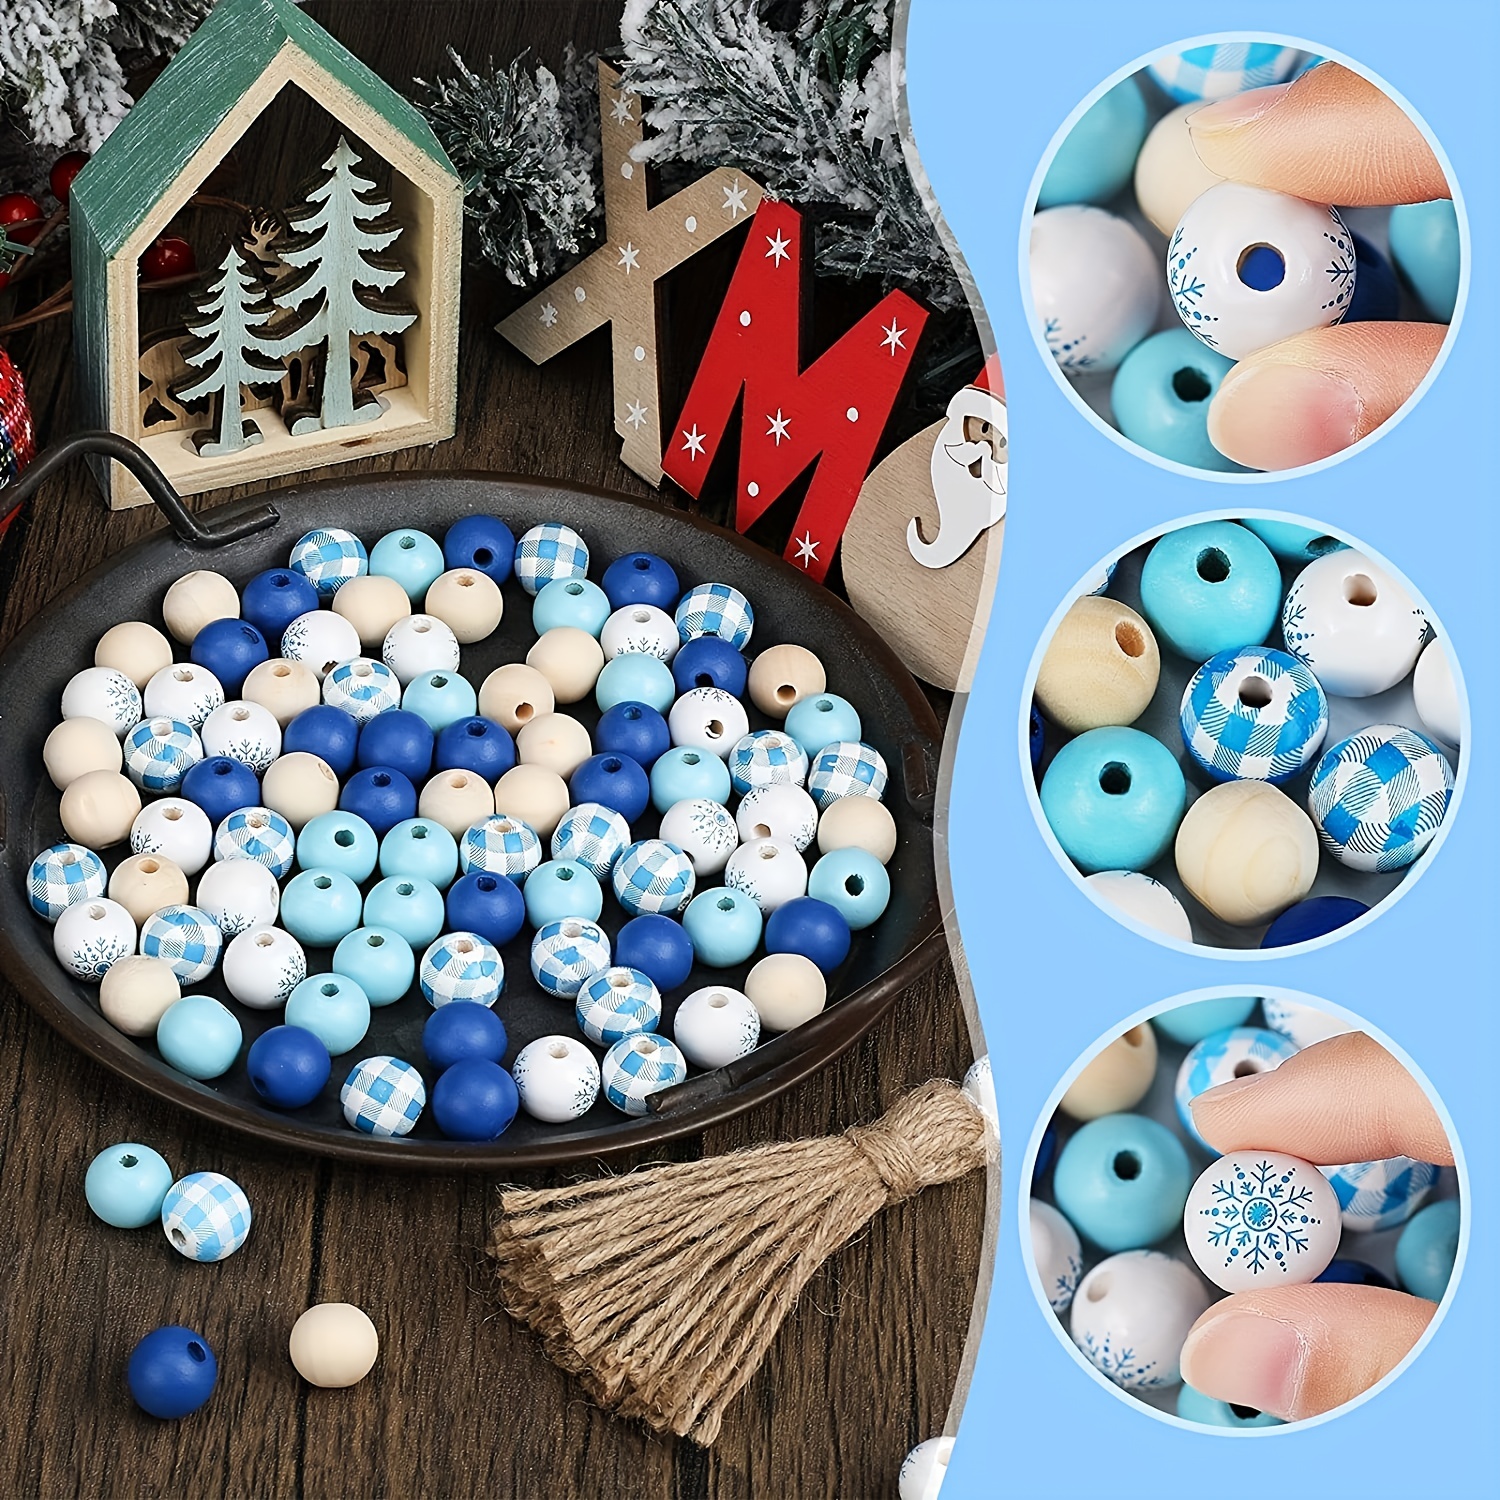 200PCS Christmas Wooden Beads For Crafts, 16Mm Wood Beads With Holes For  Garland Jewelry Making Party Holiday Decor Easy To Use